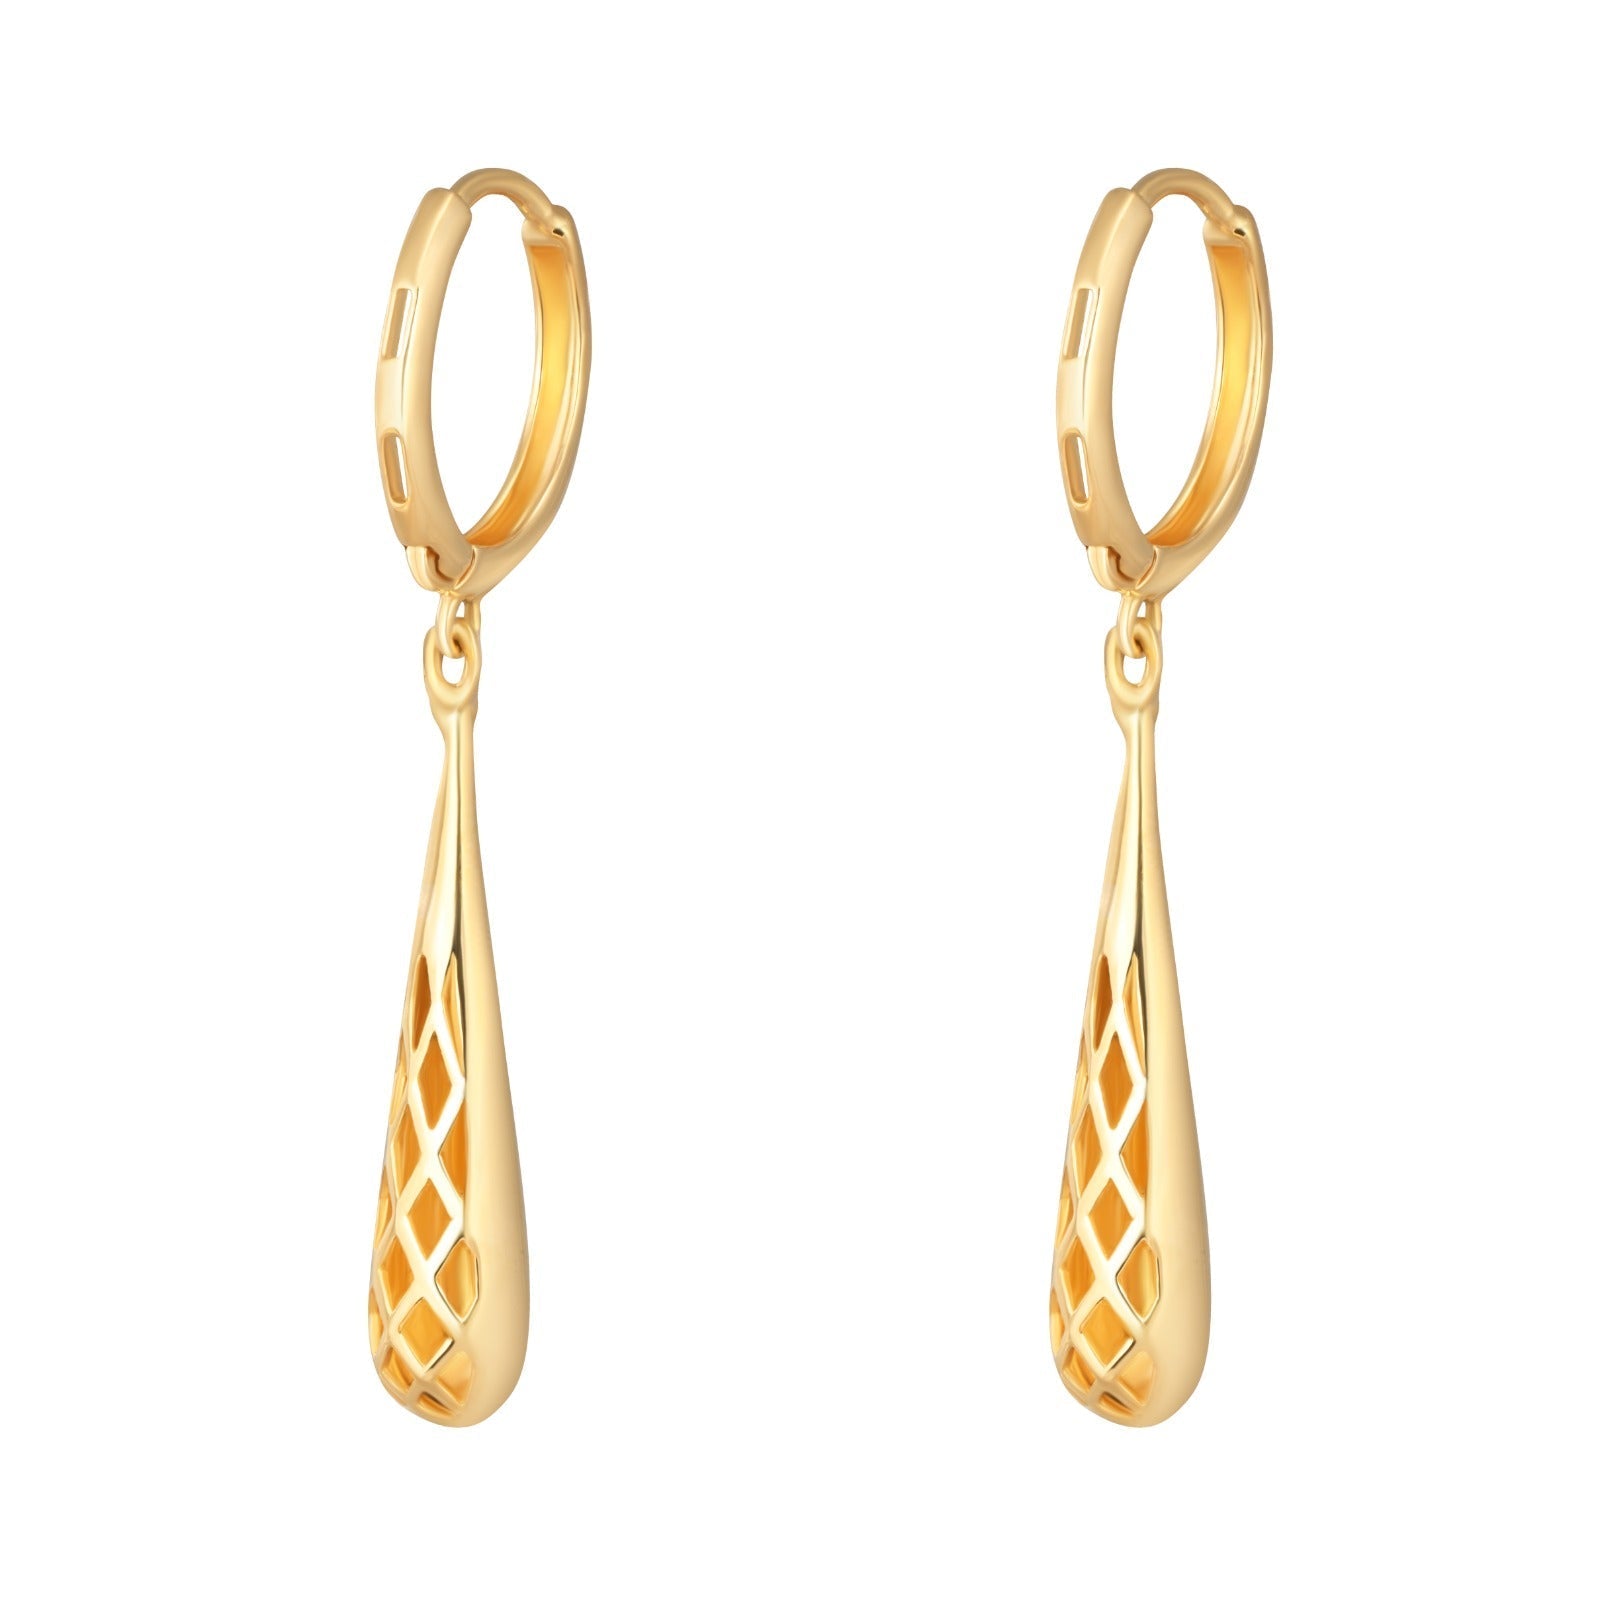 Be unique with the dangling Gold Earring in 18K Yellow gold / J-E011GC